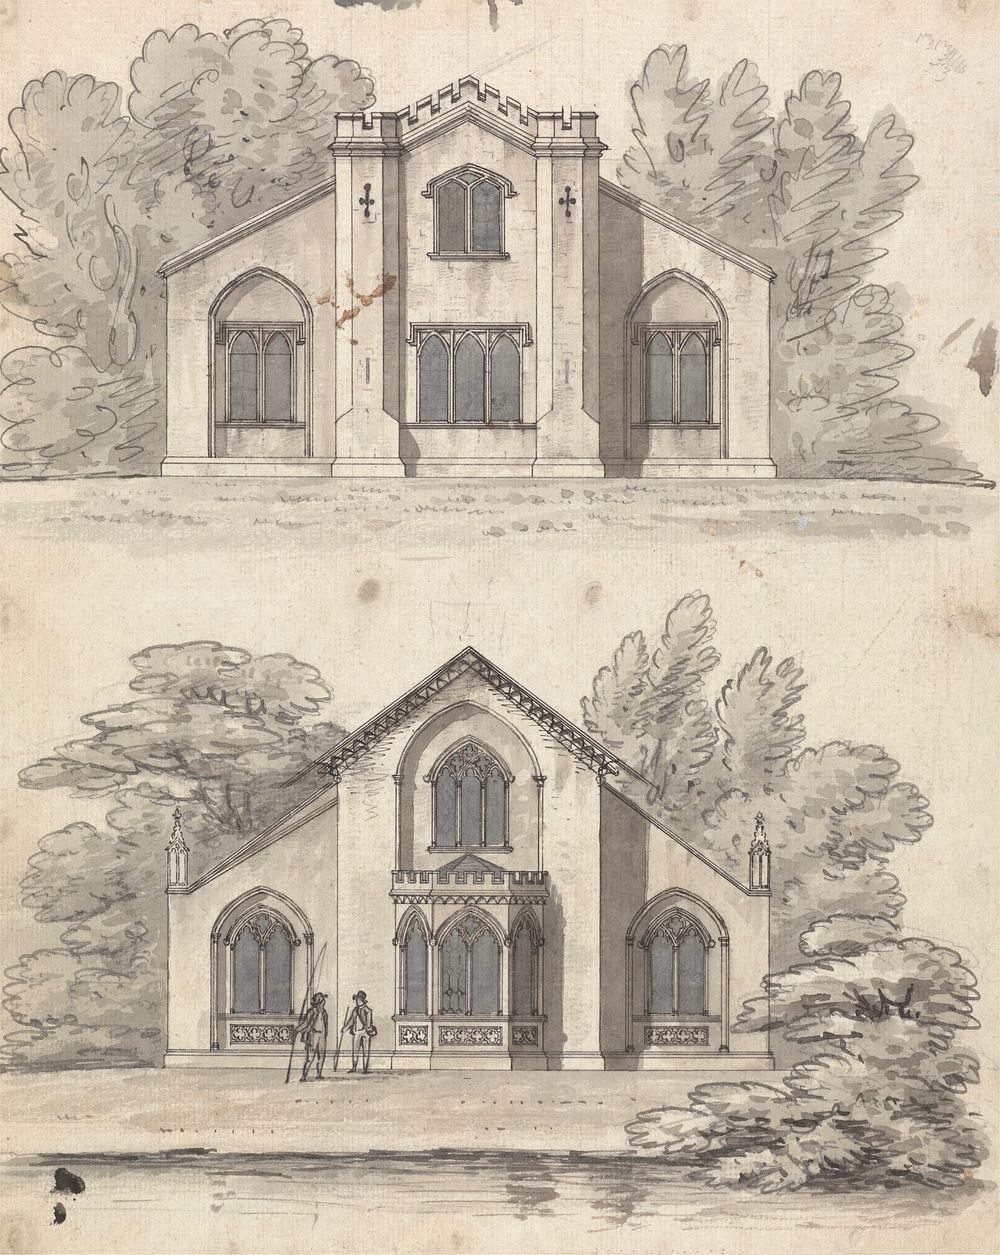 Preparatory drawings for Designs 3 and 4, Plate 2 of A Collection of Designs for Rural Retreats by James Malton